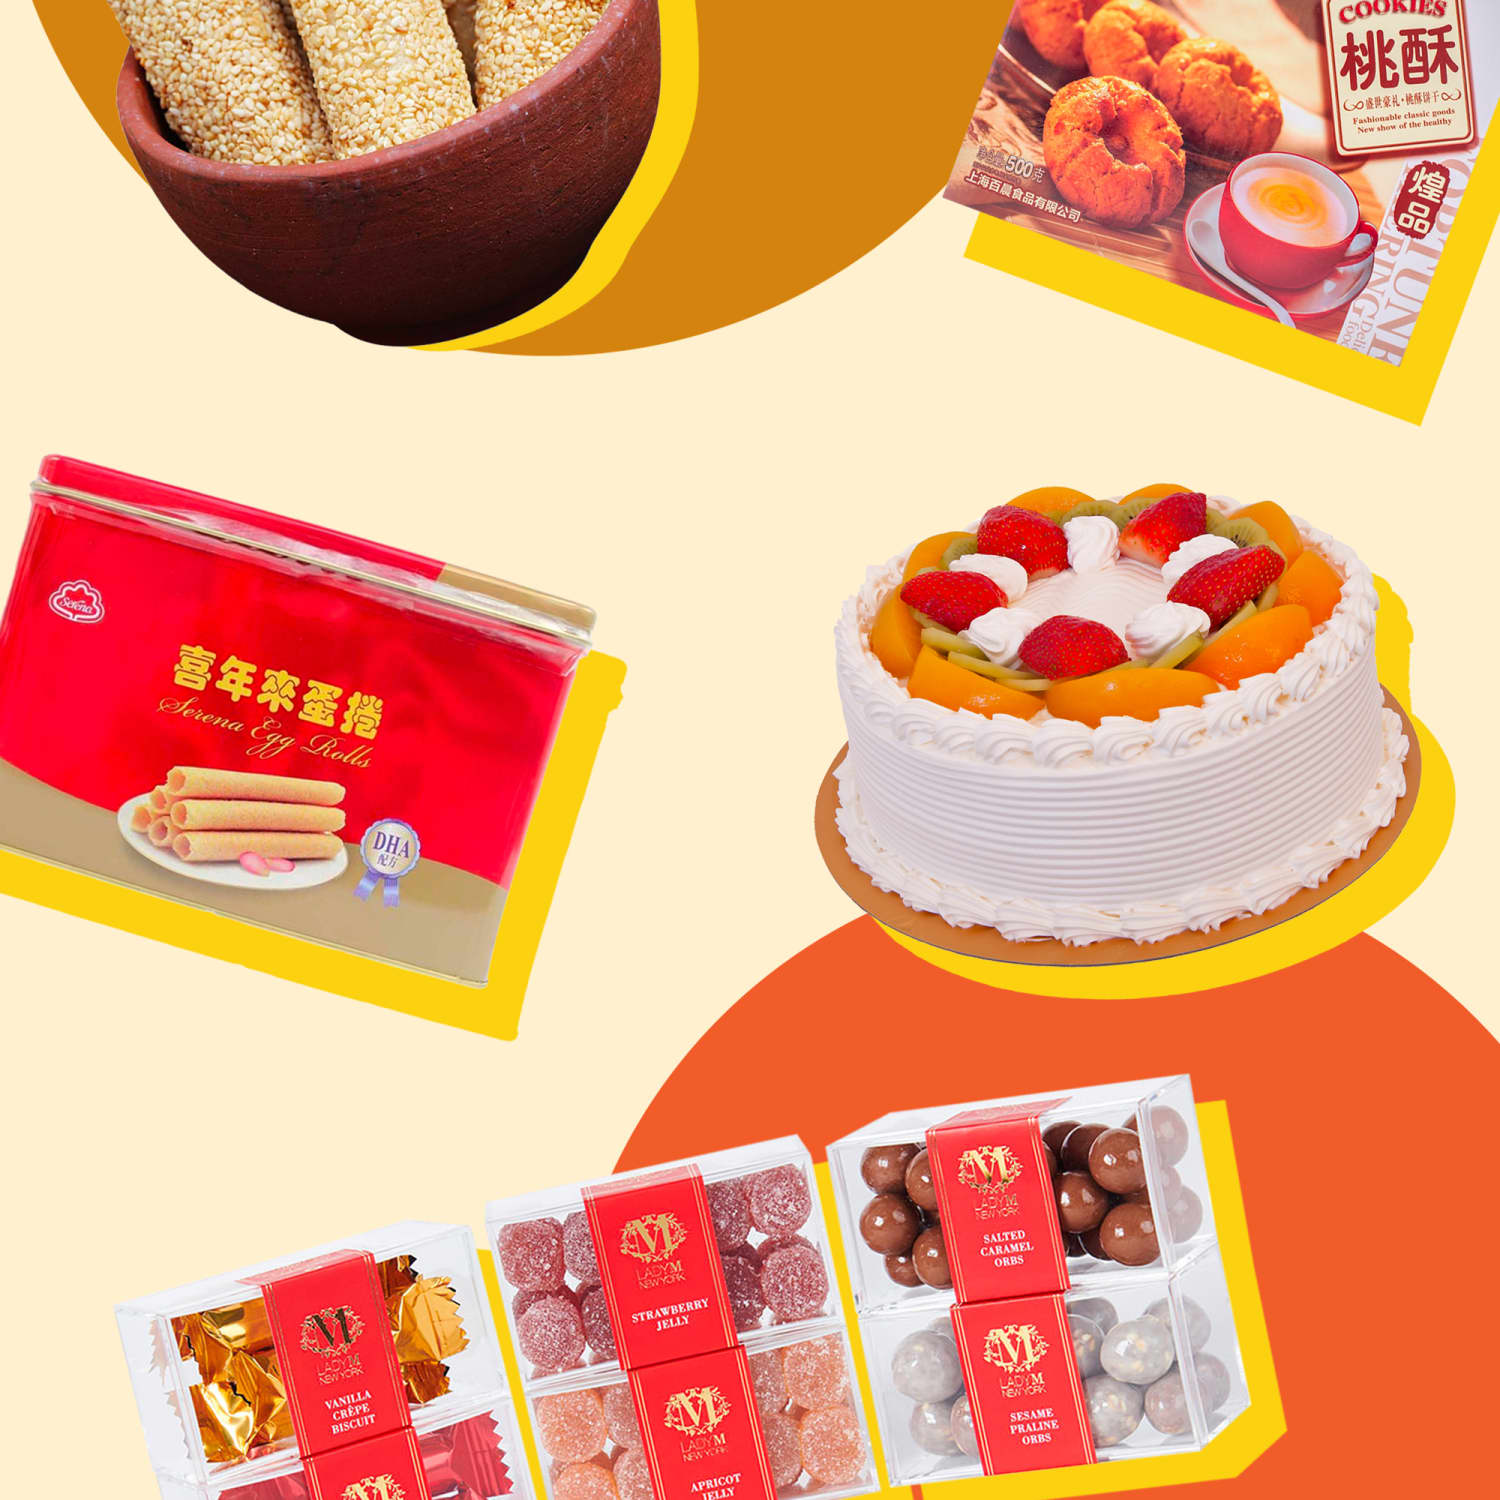 10 Amazing Chinese New Year's Desserts to Ring in 2023